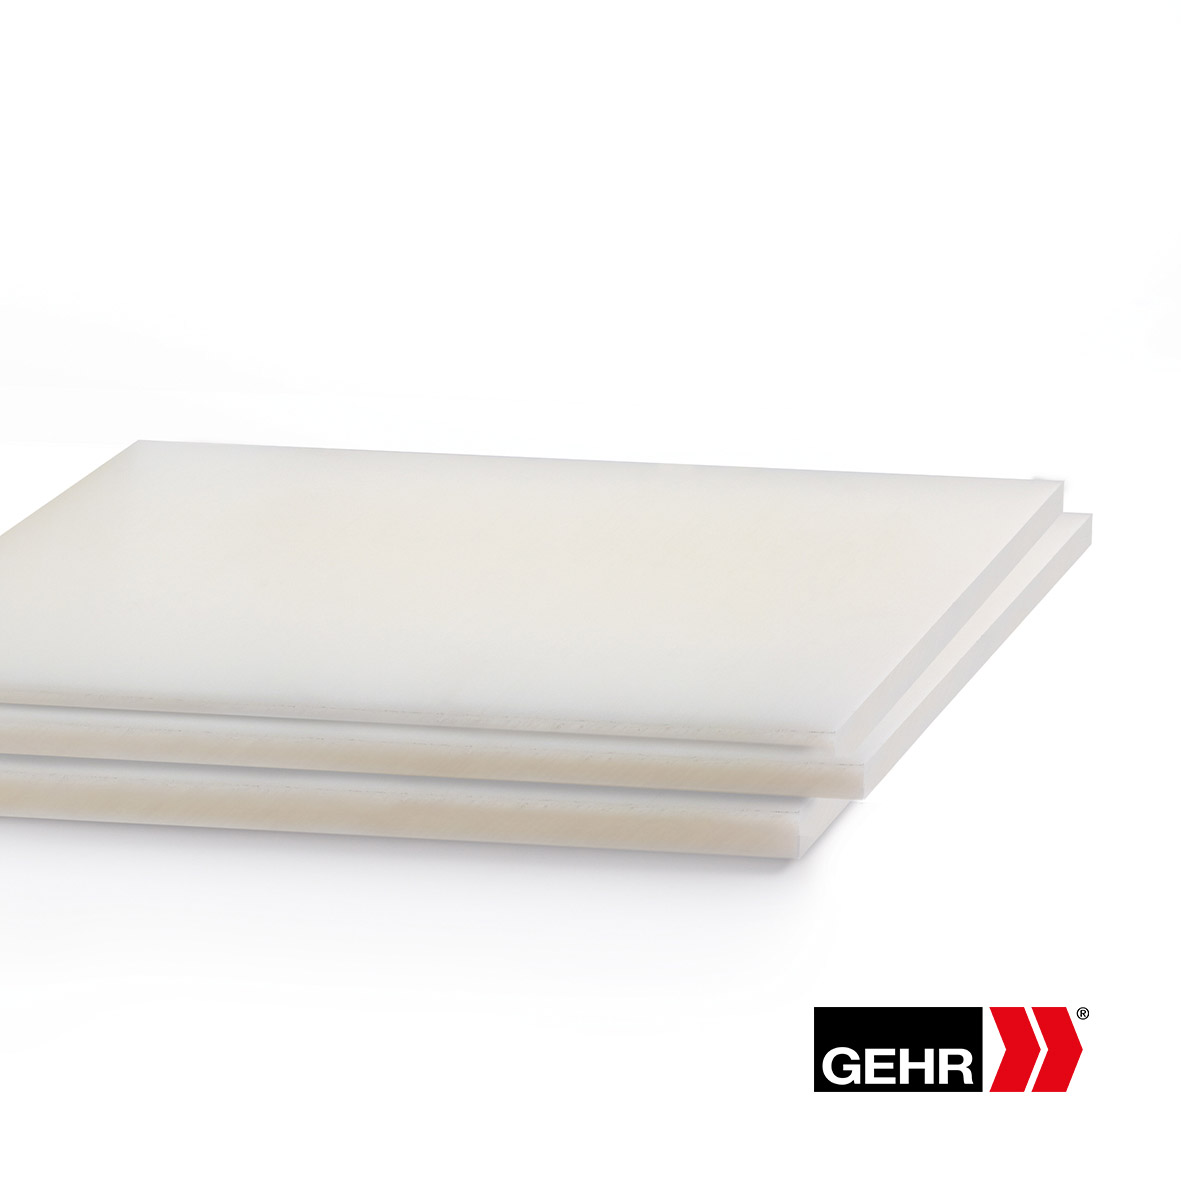 GEHR POM-C Sheets 1000 x 10 mm natural